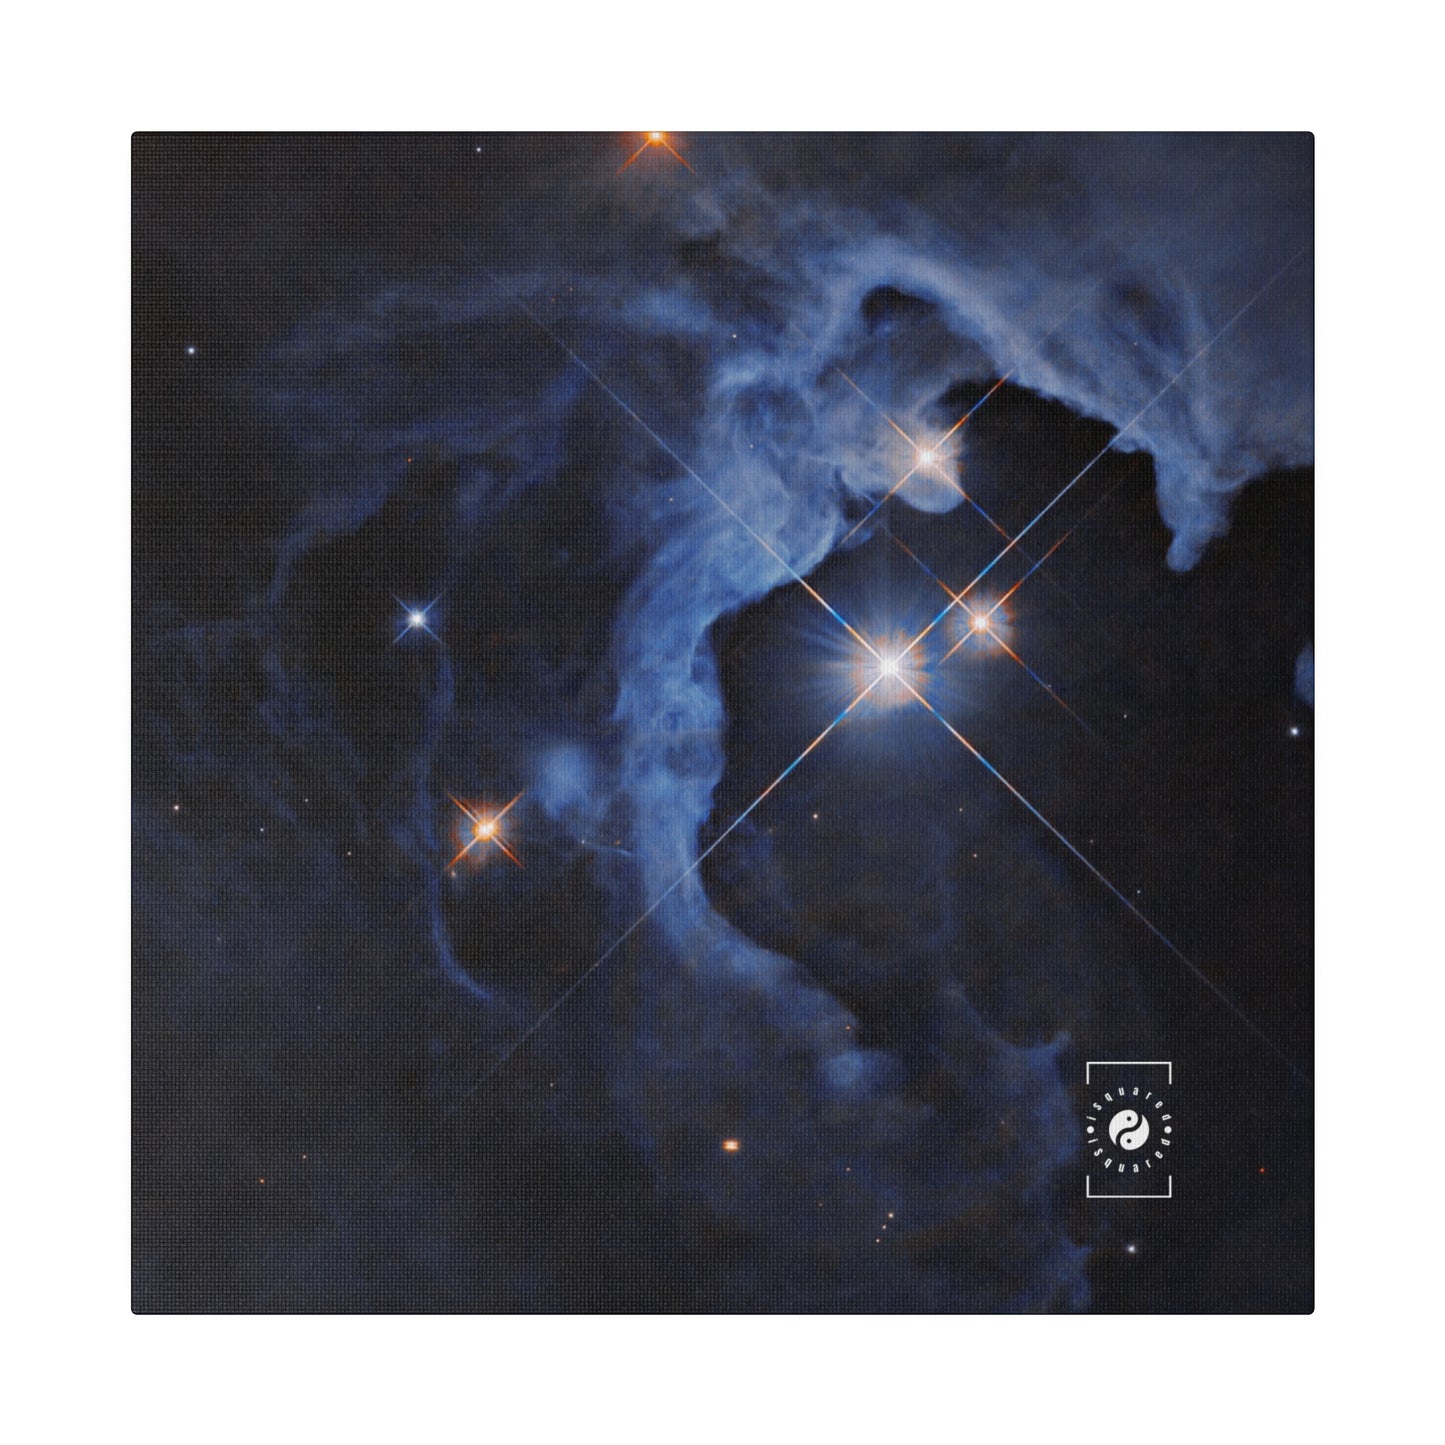 HP Tau, HP Tau G2, and G3 3 star system captured by Hubble - Art Print Canvas